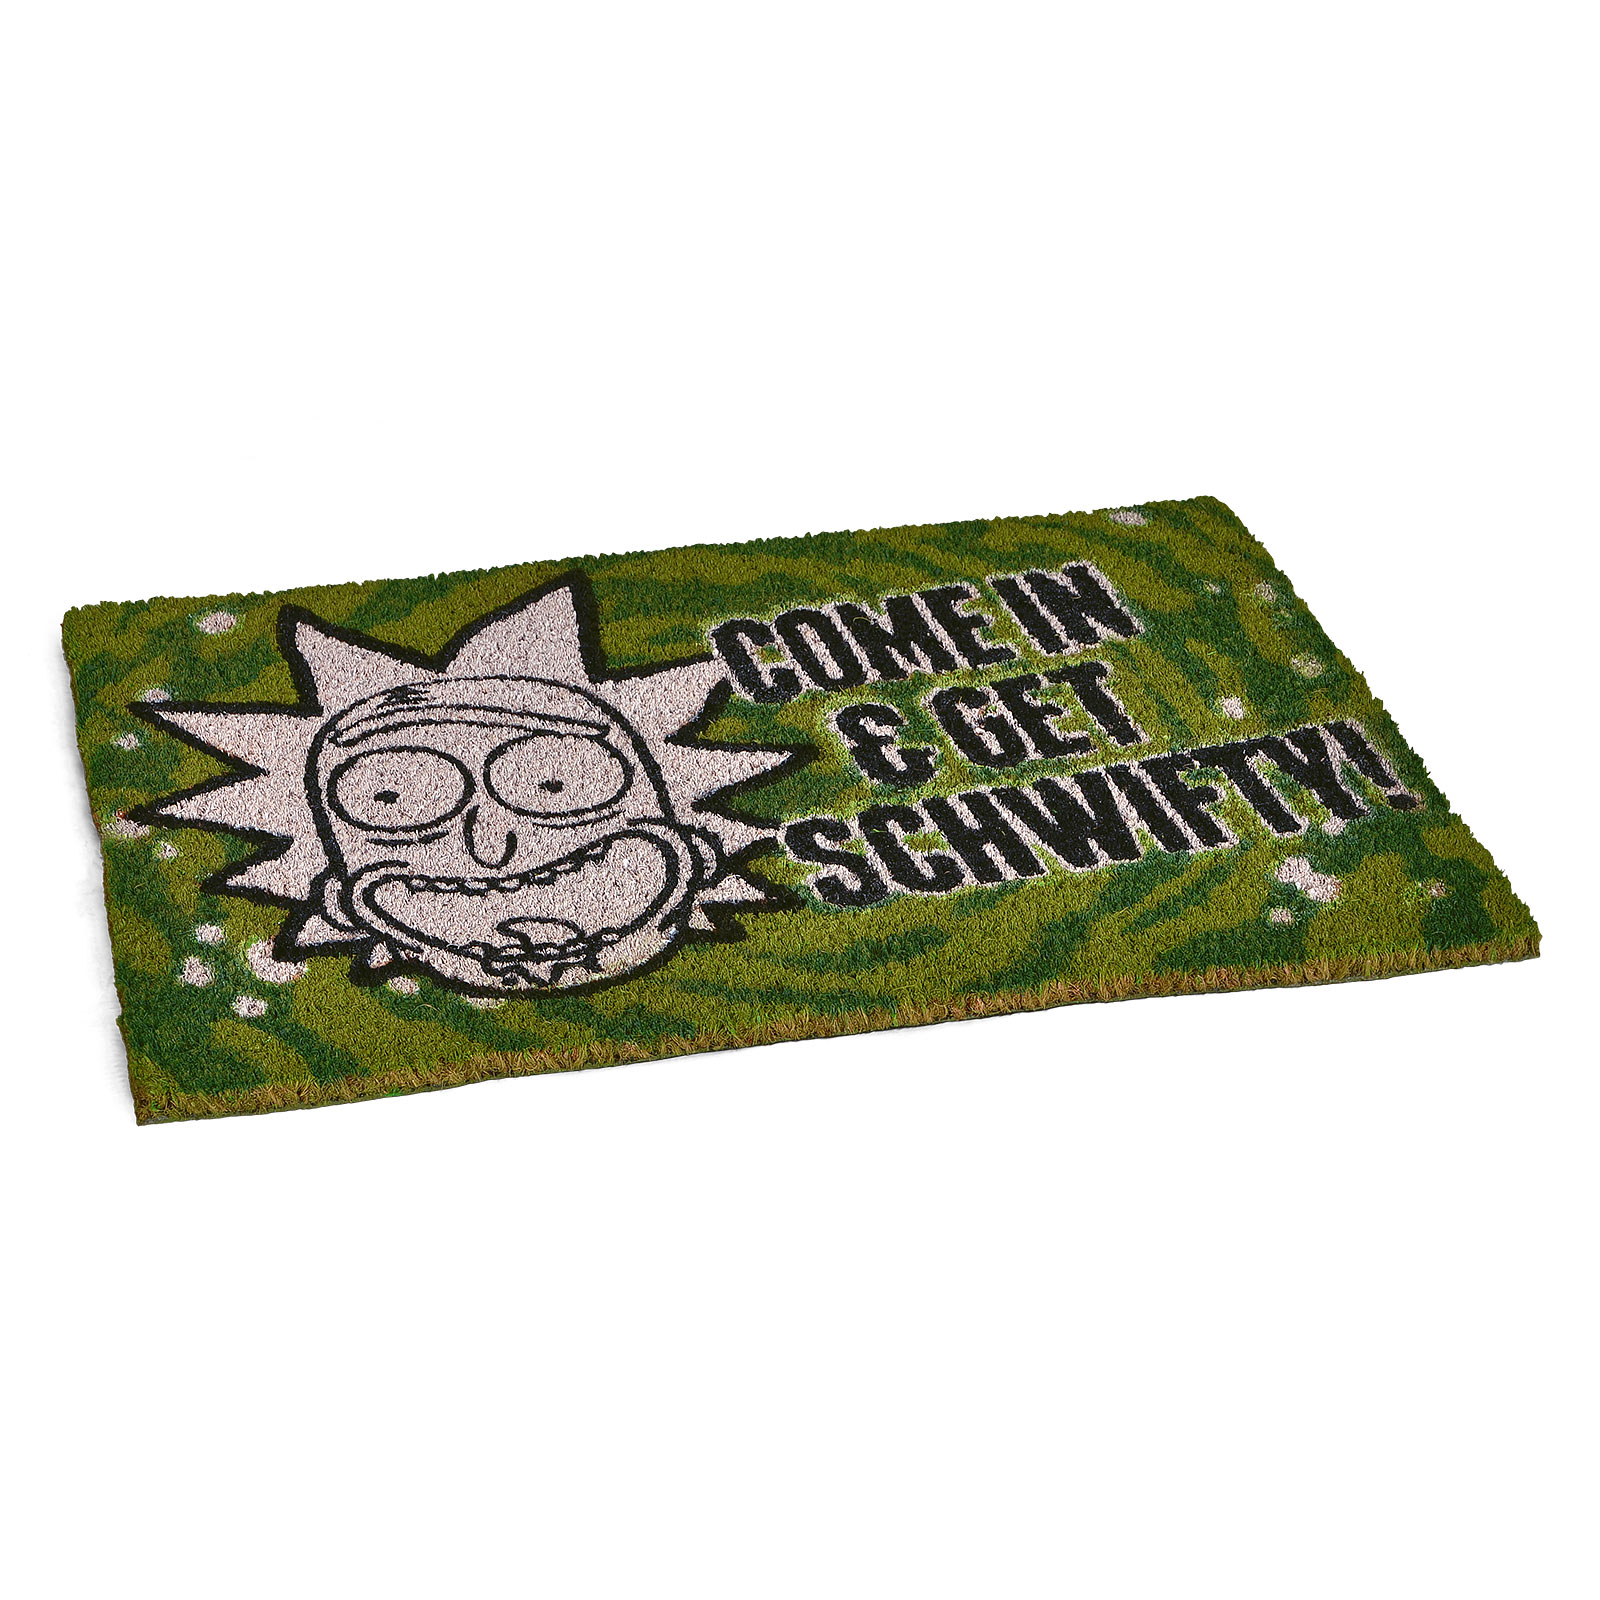 Rick and Morty - Tapis de sol Get Schwifty